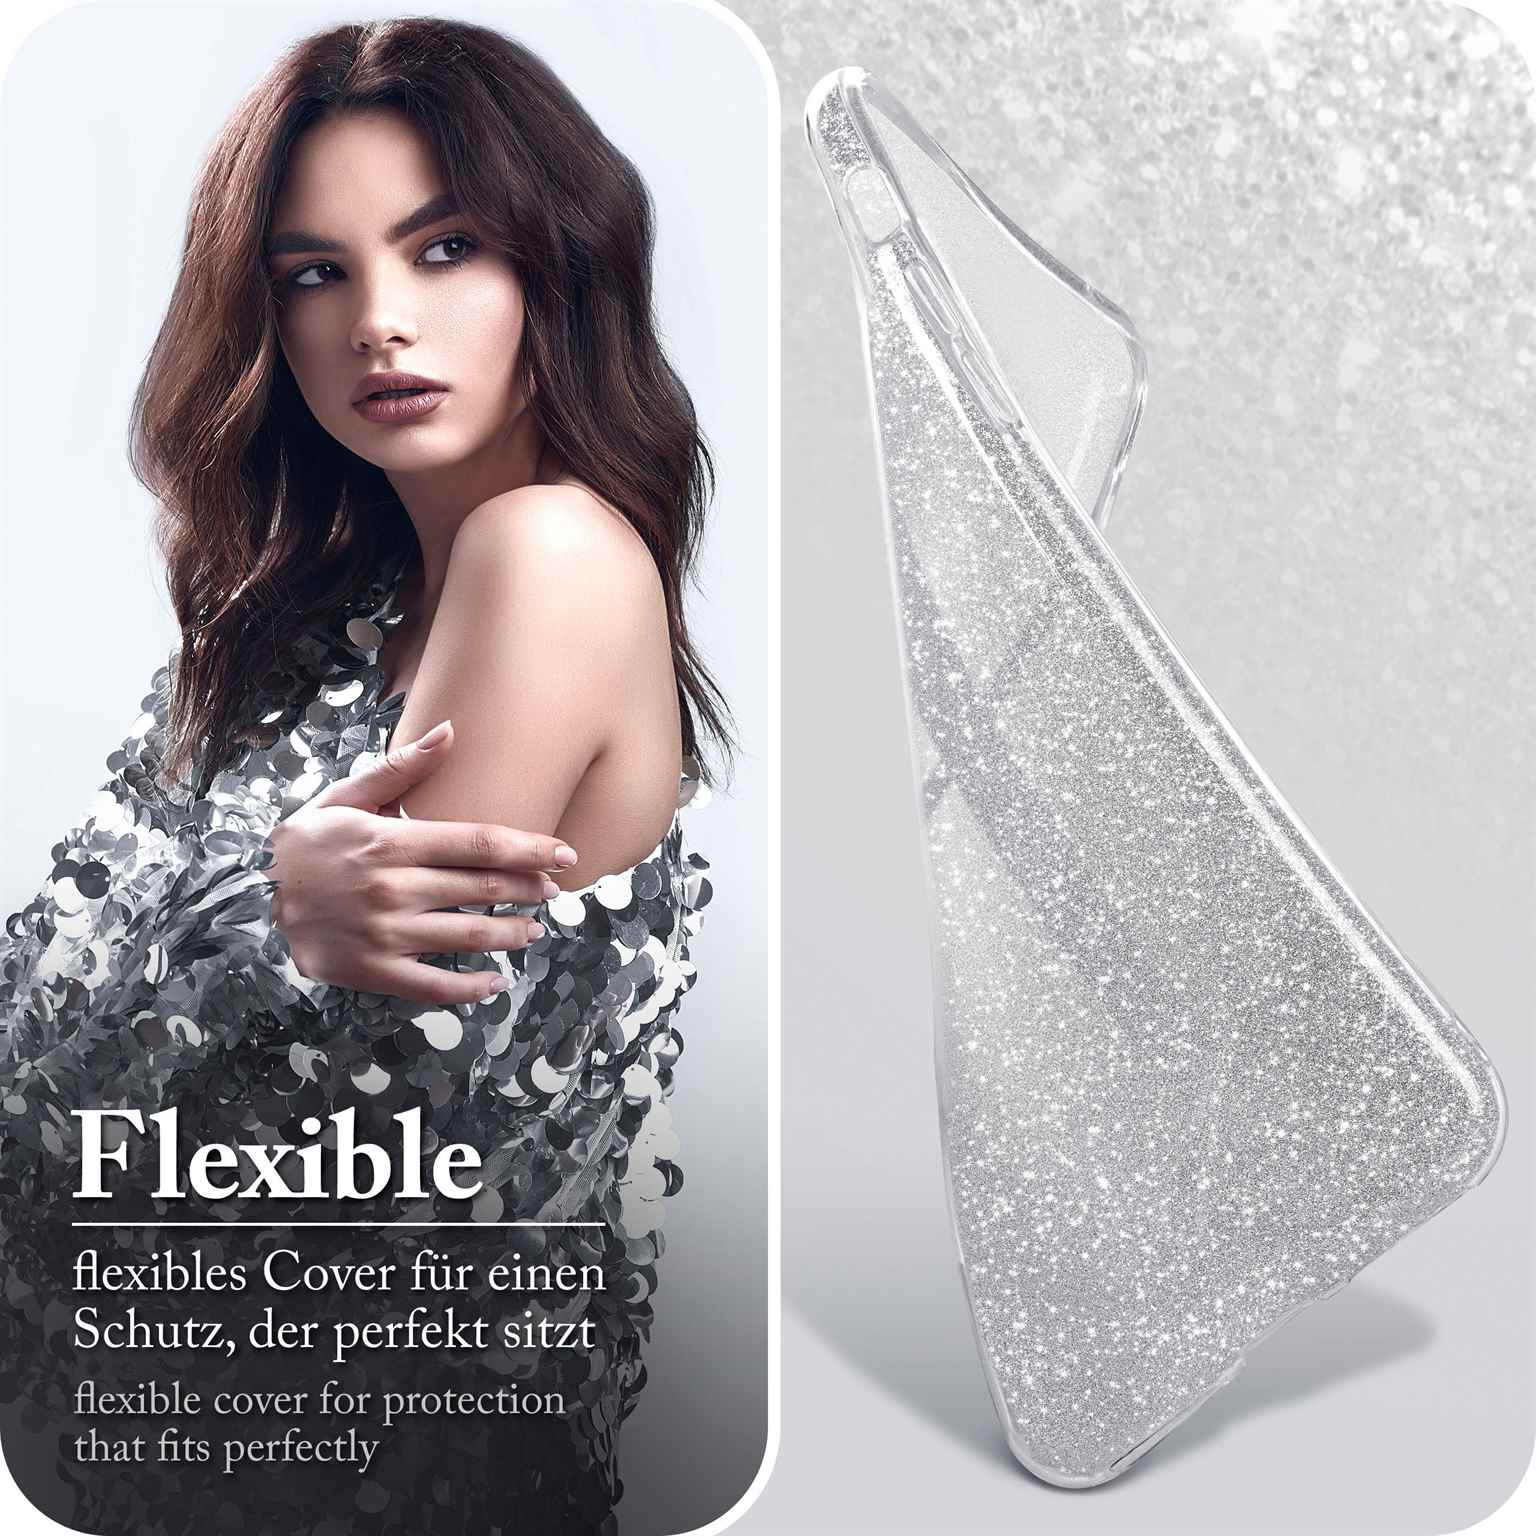 Sparkle A71, Glitter Case, Galaxy Backcover, - ONEFLOW Samsung, Silver